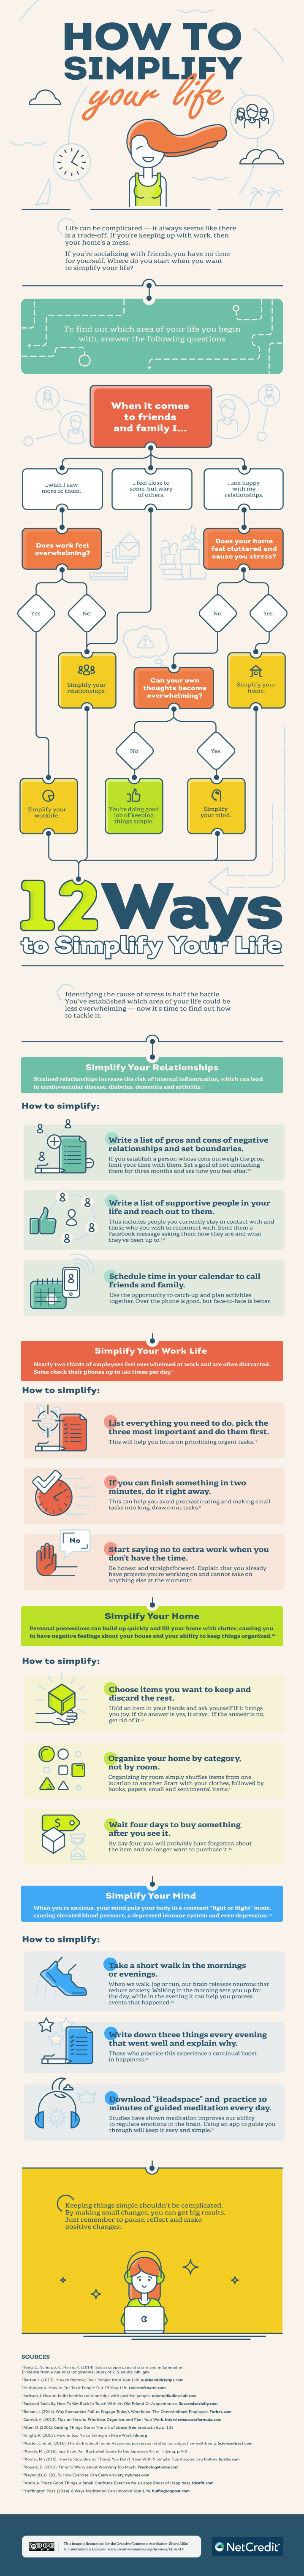 How to Simplify Your Life - #infographic